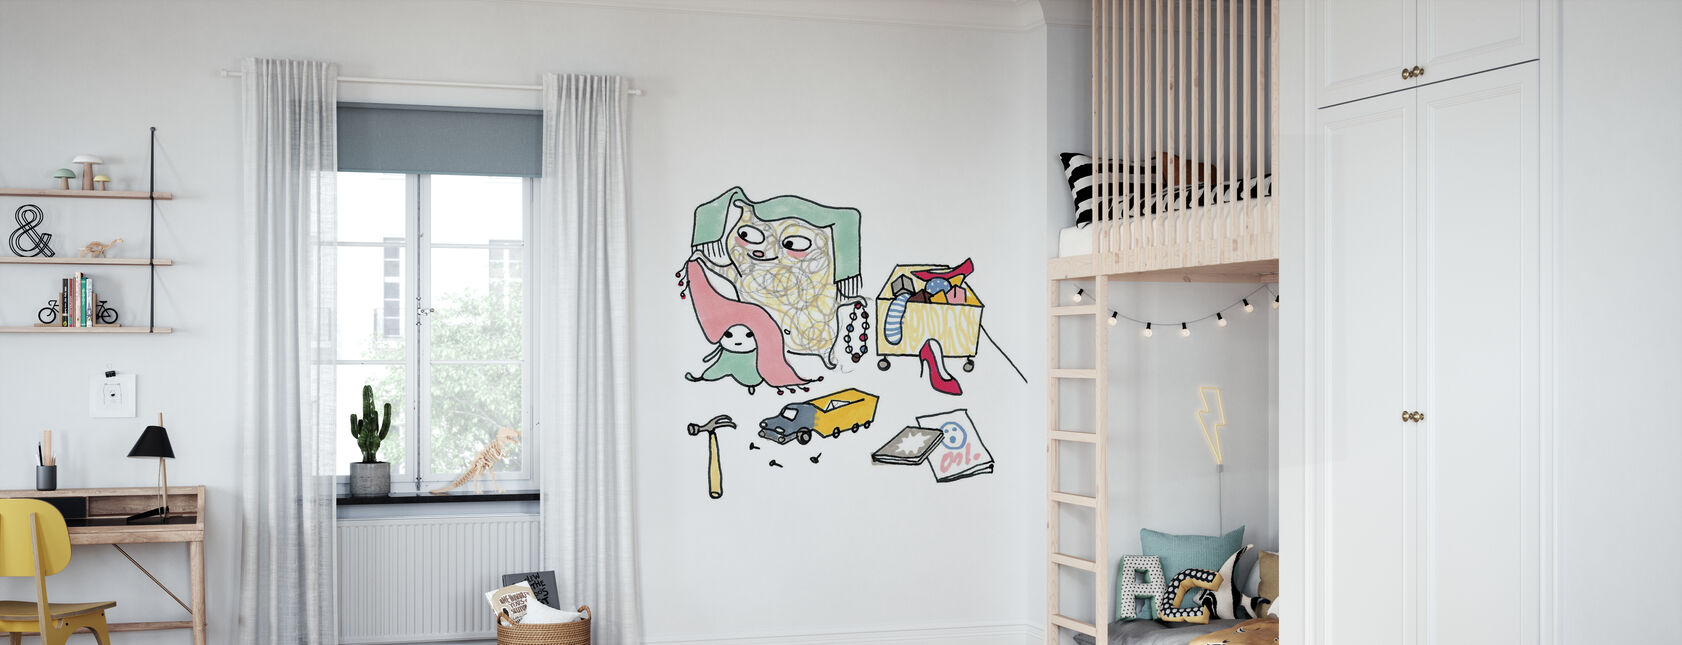 Whose toys - Wallpaper - Kids Room